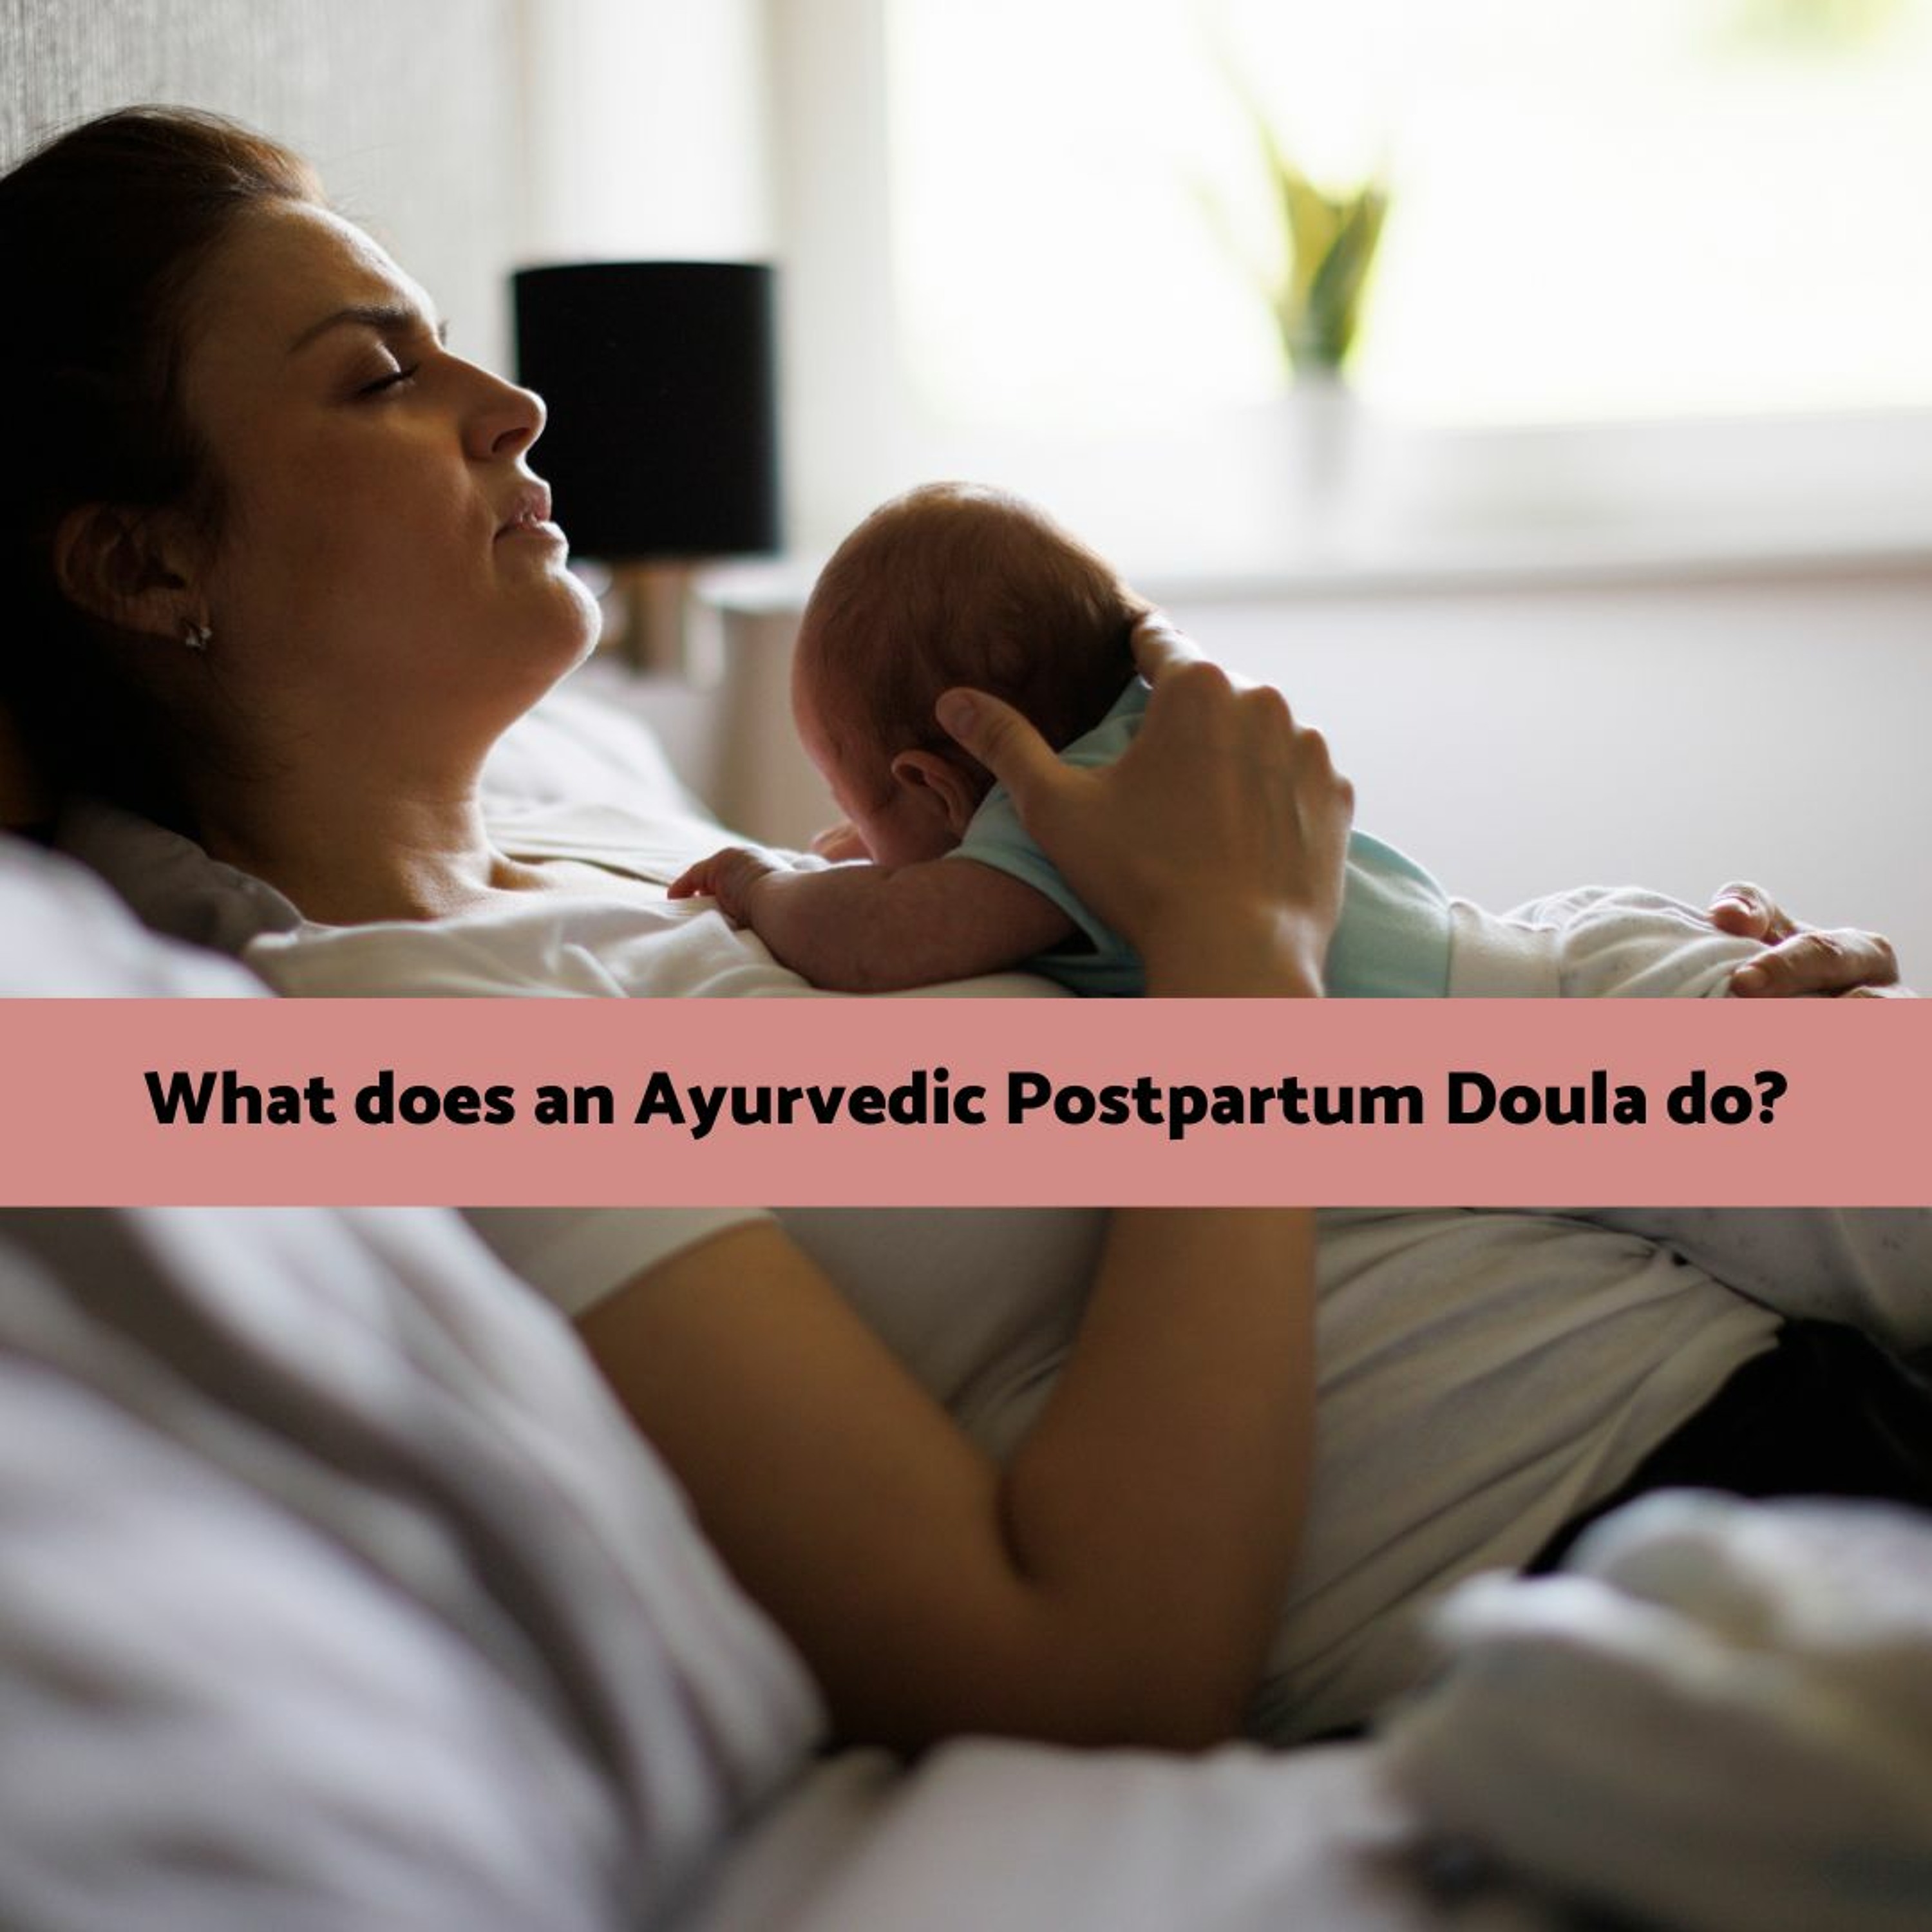 What does an Ayurvedic Postpartum Doula Do?